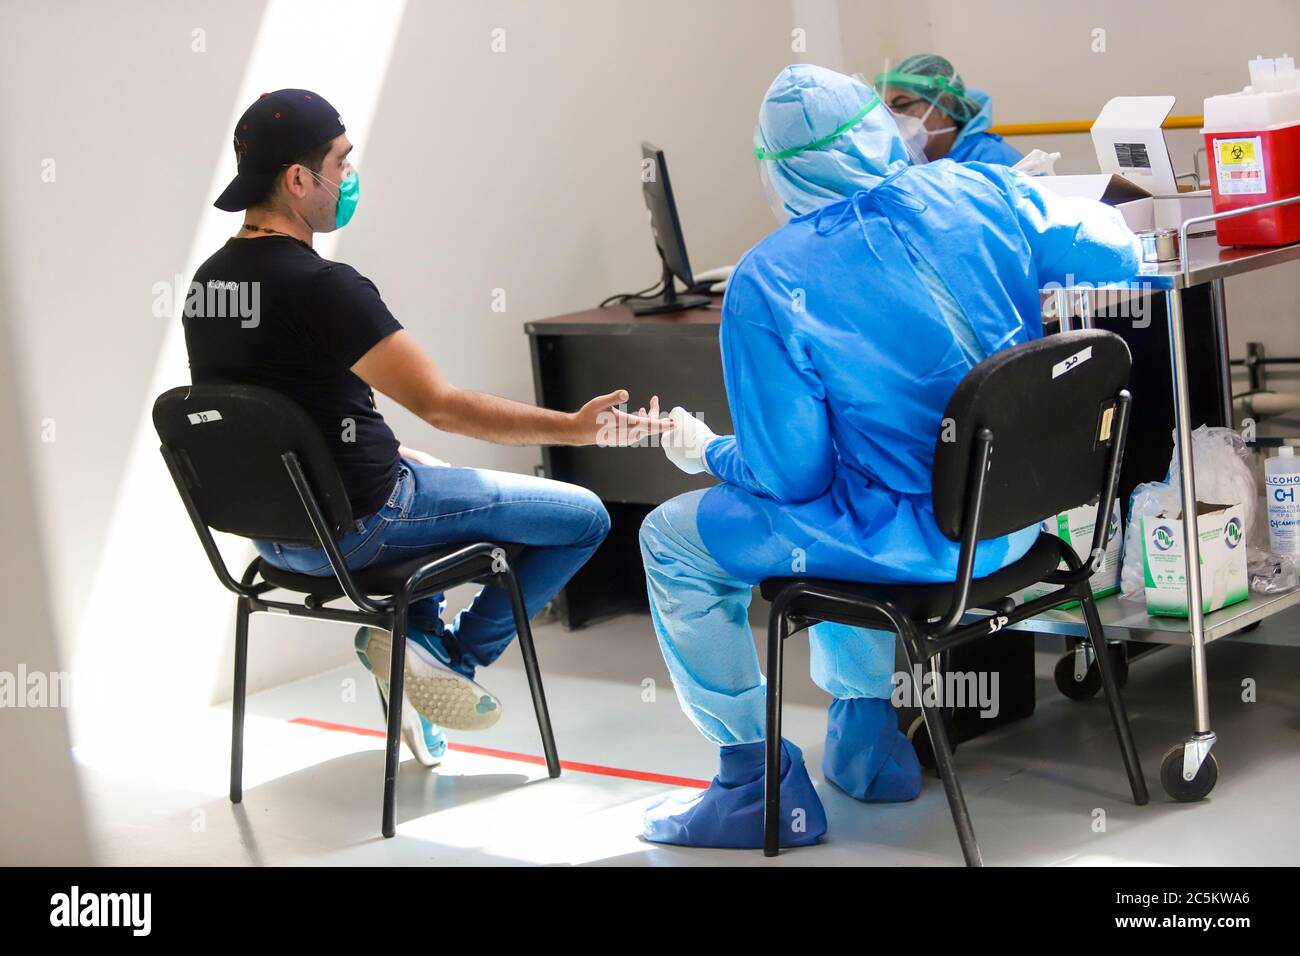 HERMOSILLO, MEXICO - JULY 3:A man is attended by health personnel who perform a rapid Covid-19 detection test during a health day held at the Arena Sonora  on July 3, 2020 in Hermosillo, Mexico. (Luis Gutierrez/Norte Photo) Stock Photo